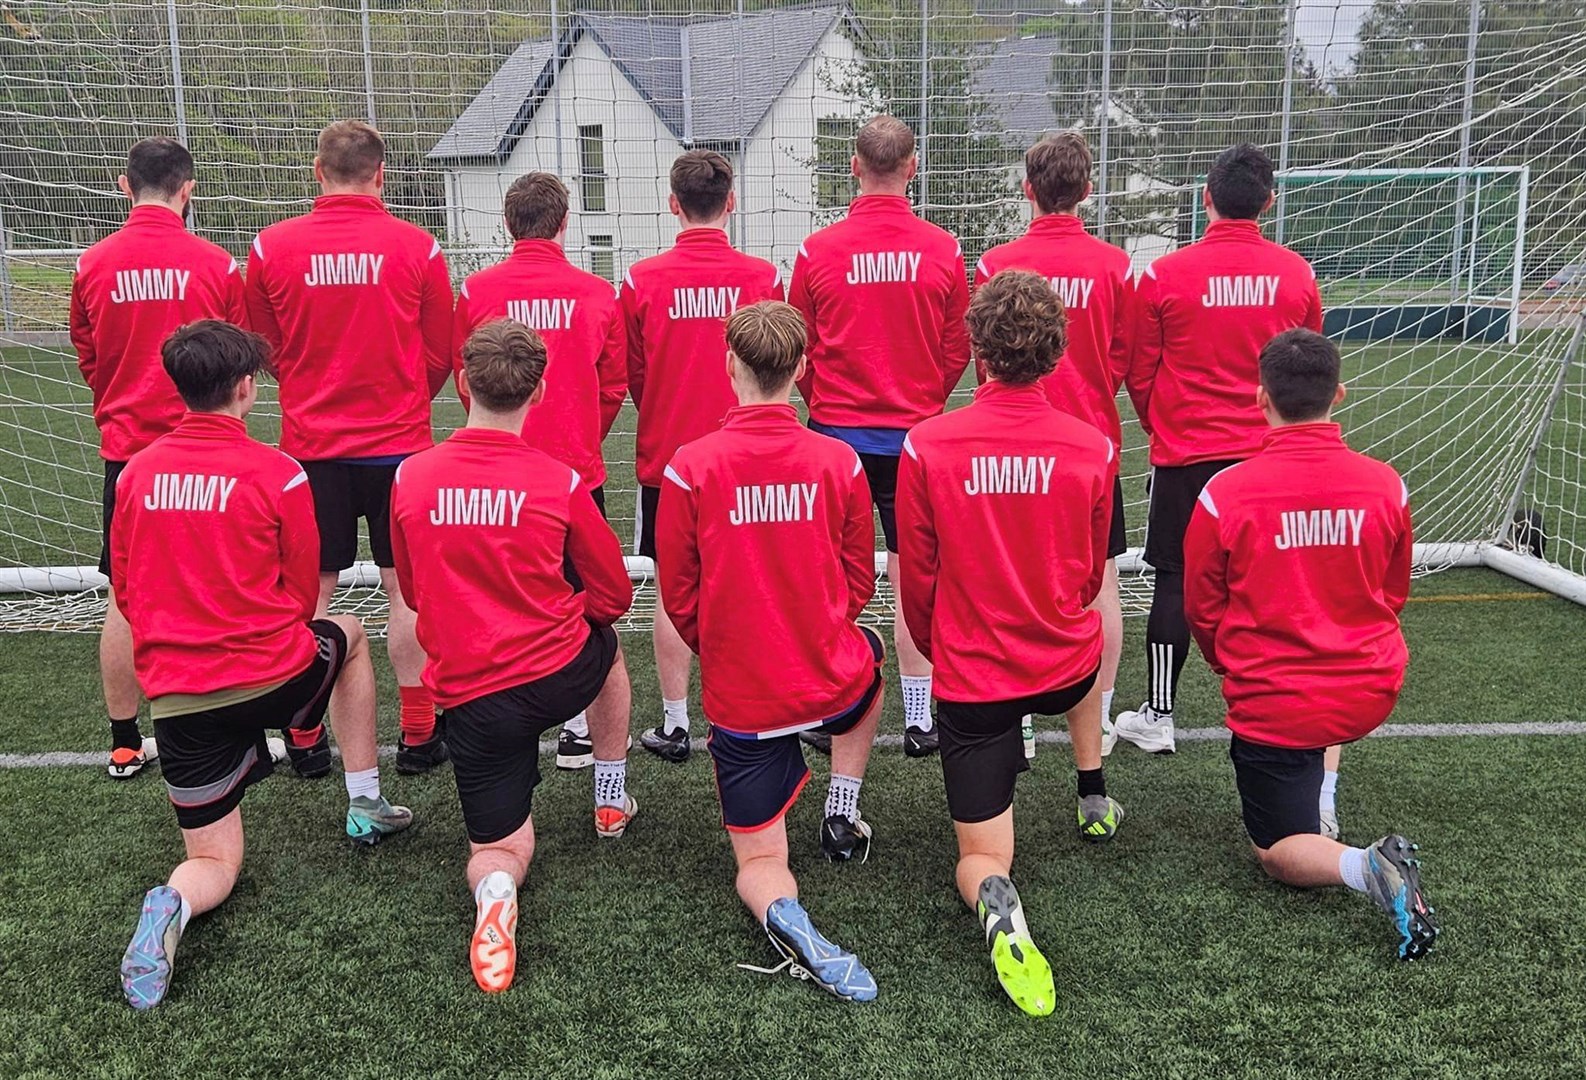 Lochbroom Football Club with their shirts in memory of Jimmy Lavelle.